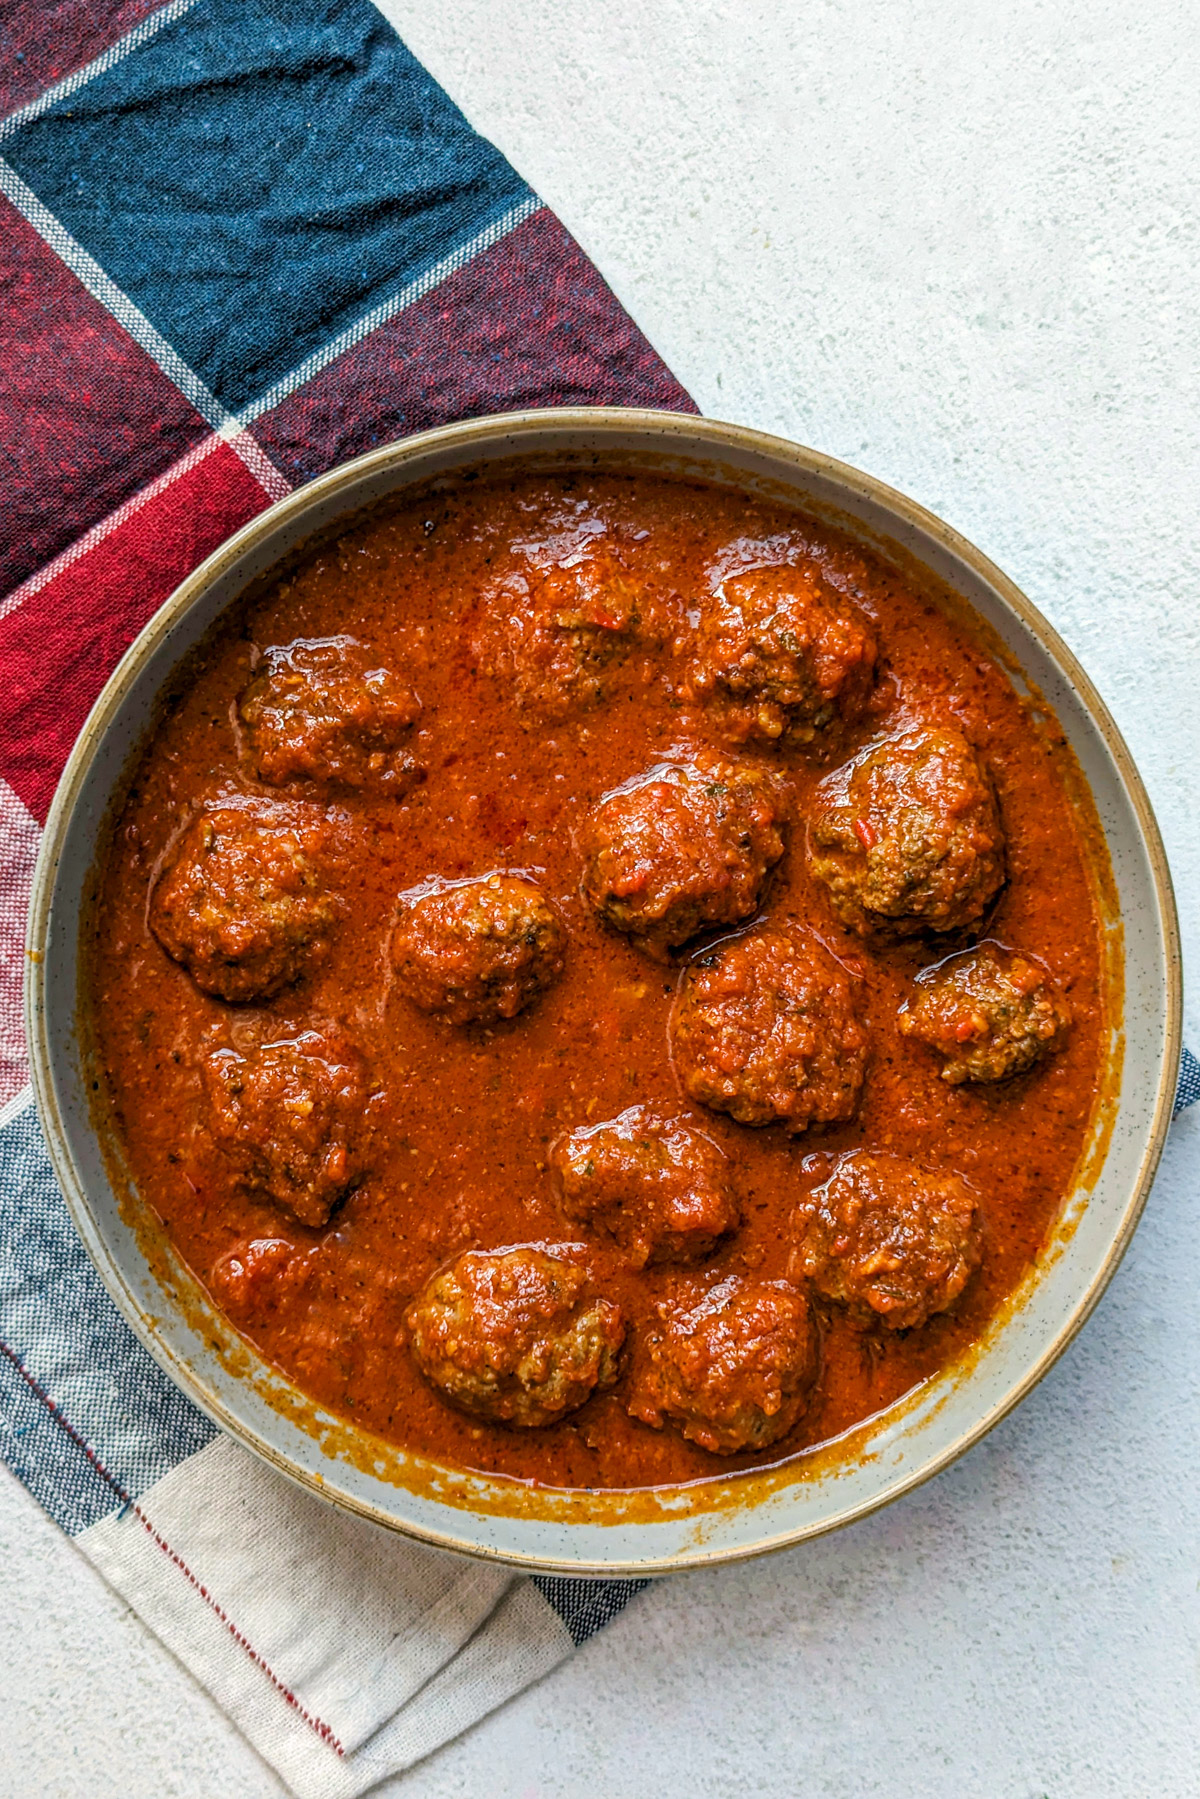 A serving bowl with Dutch oven meatballs.